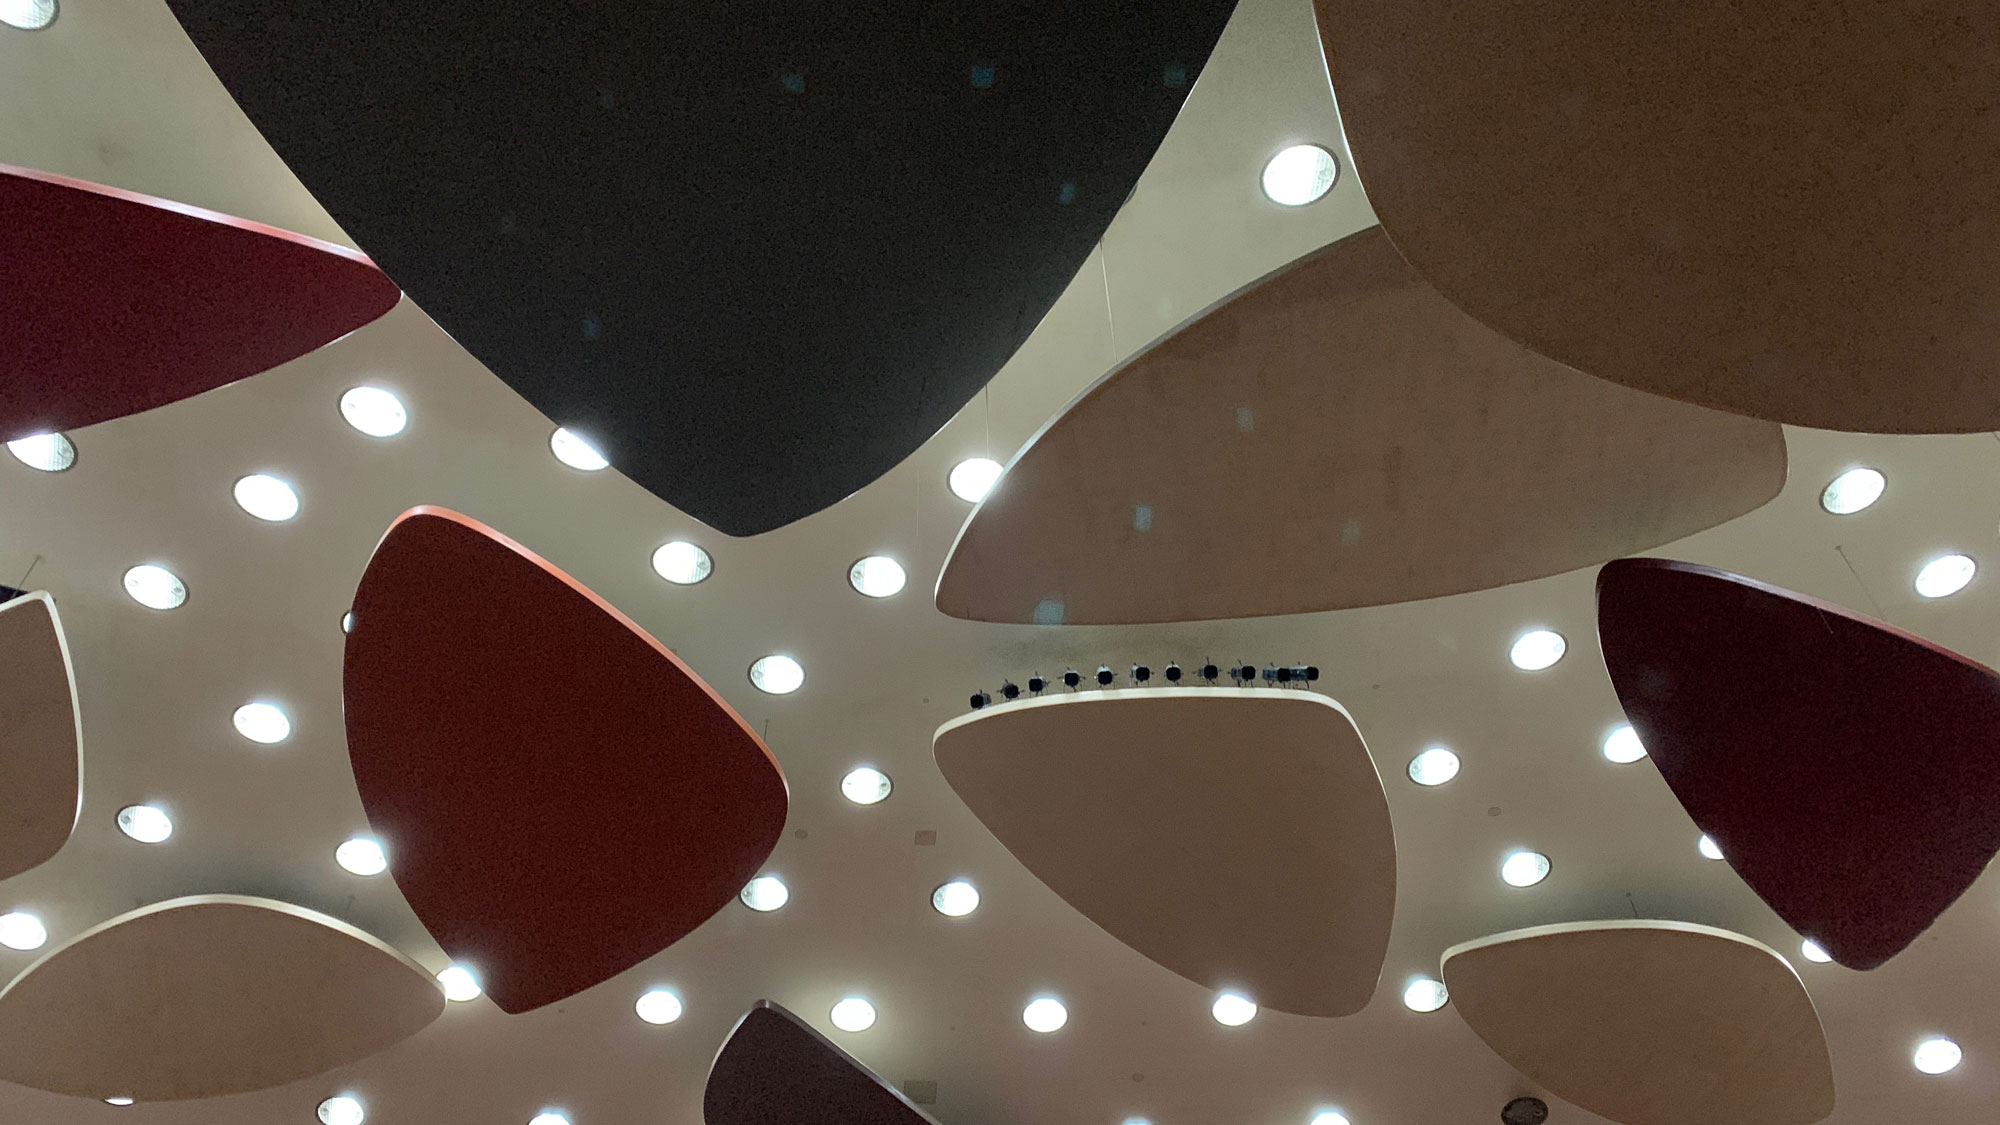 Rounded triangular geometric shapes in muted primary colors mounted on to a white ceiling with rounding lights in between. 